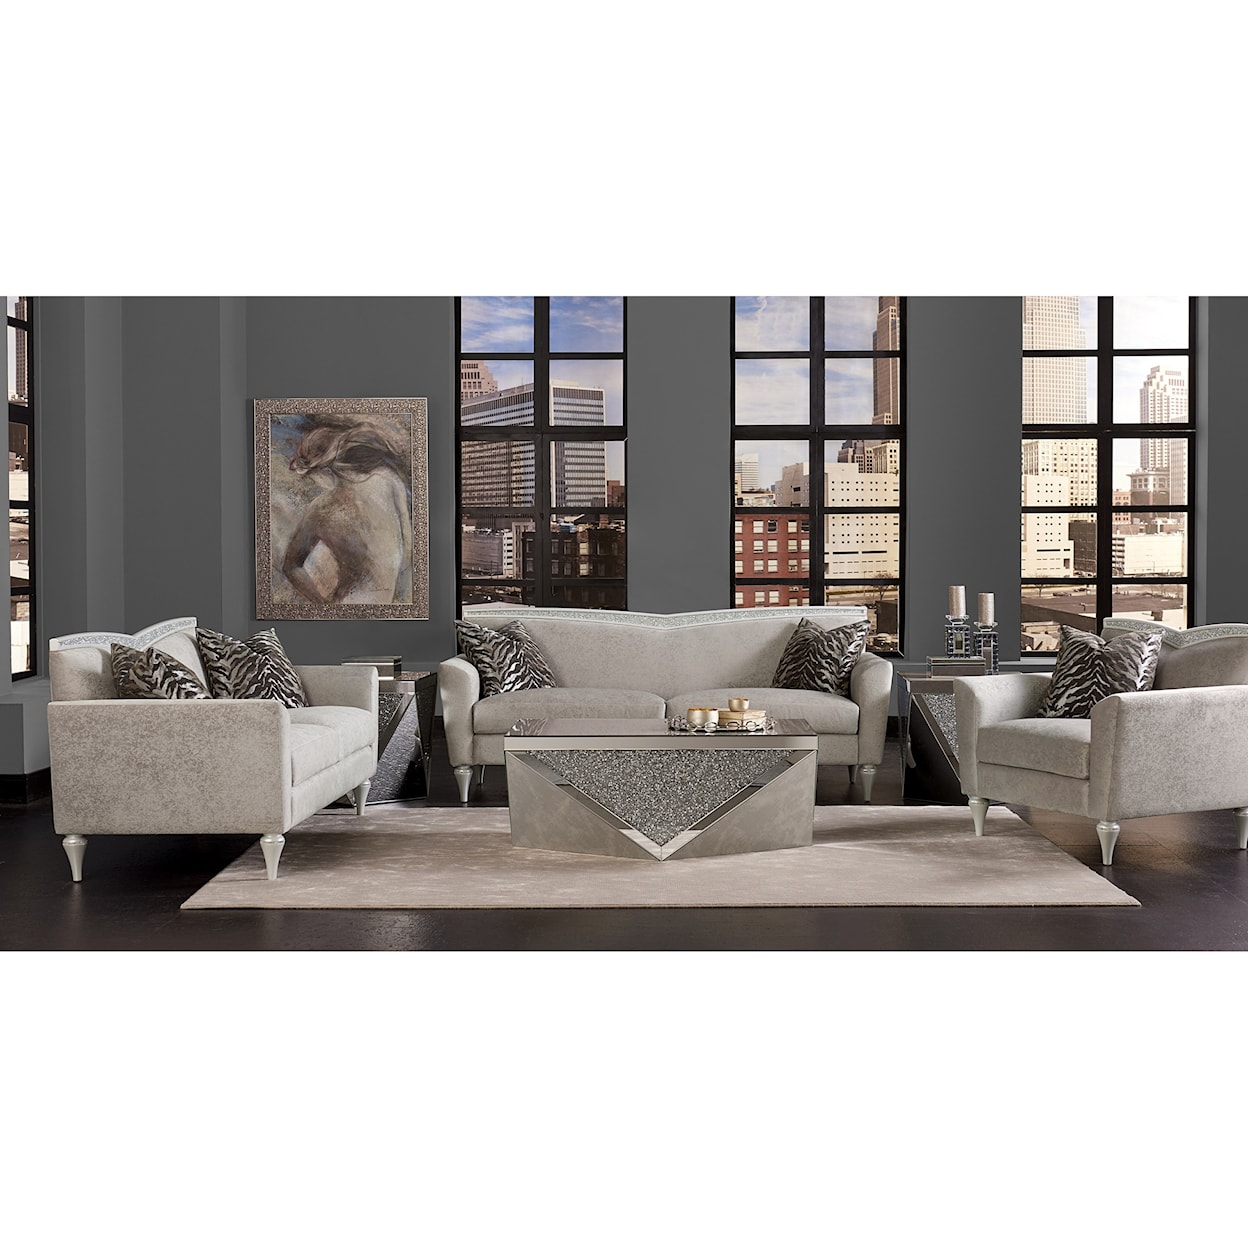 Michael Amini Melrose Plaza Sofa with Crystal Accents